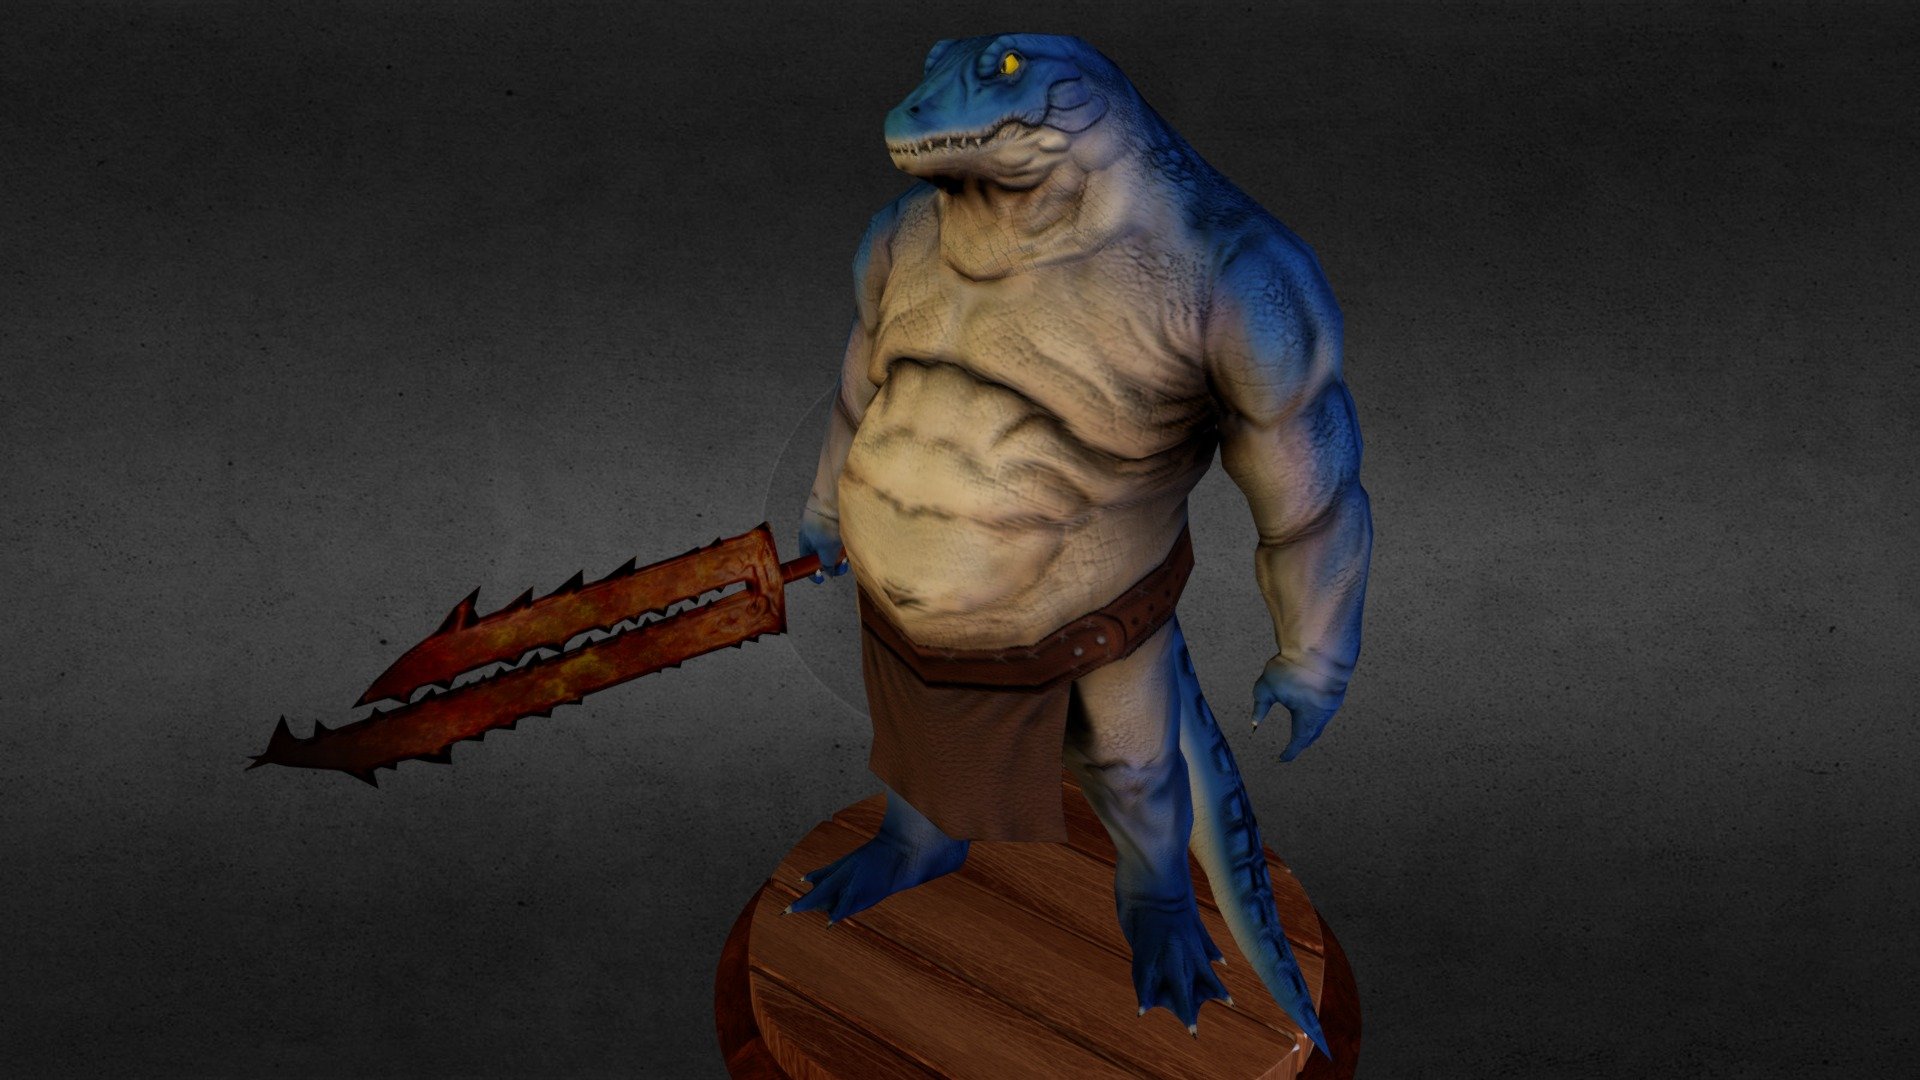 Low res enemy idea based off of this concept http://www.cgwall.cn/upload/2014/04/0428AAOSHF1p25823Wo-1.jpg - Alligator Enemy - 3D model by Alex (@AlexStocking) 3d model